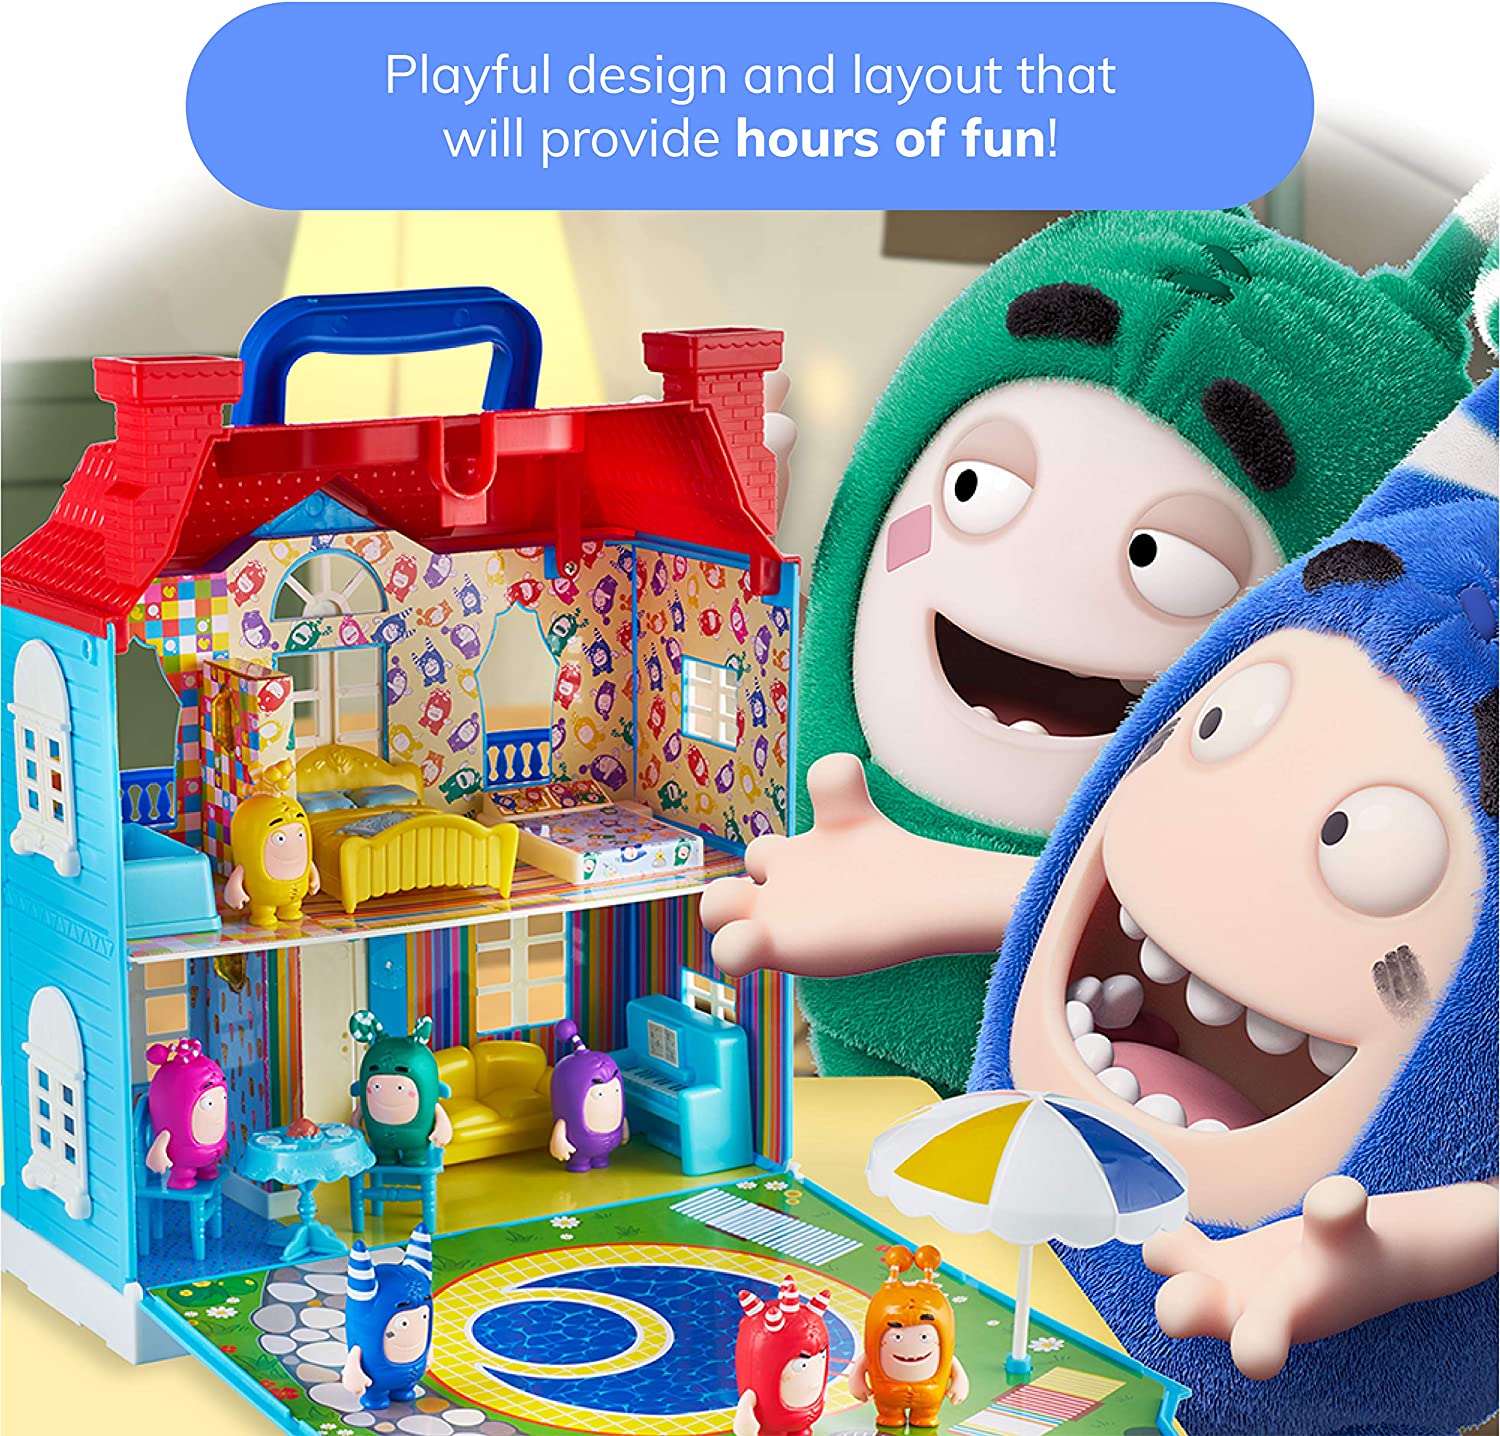 ODDBODS Playset with House for Kids